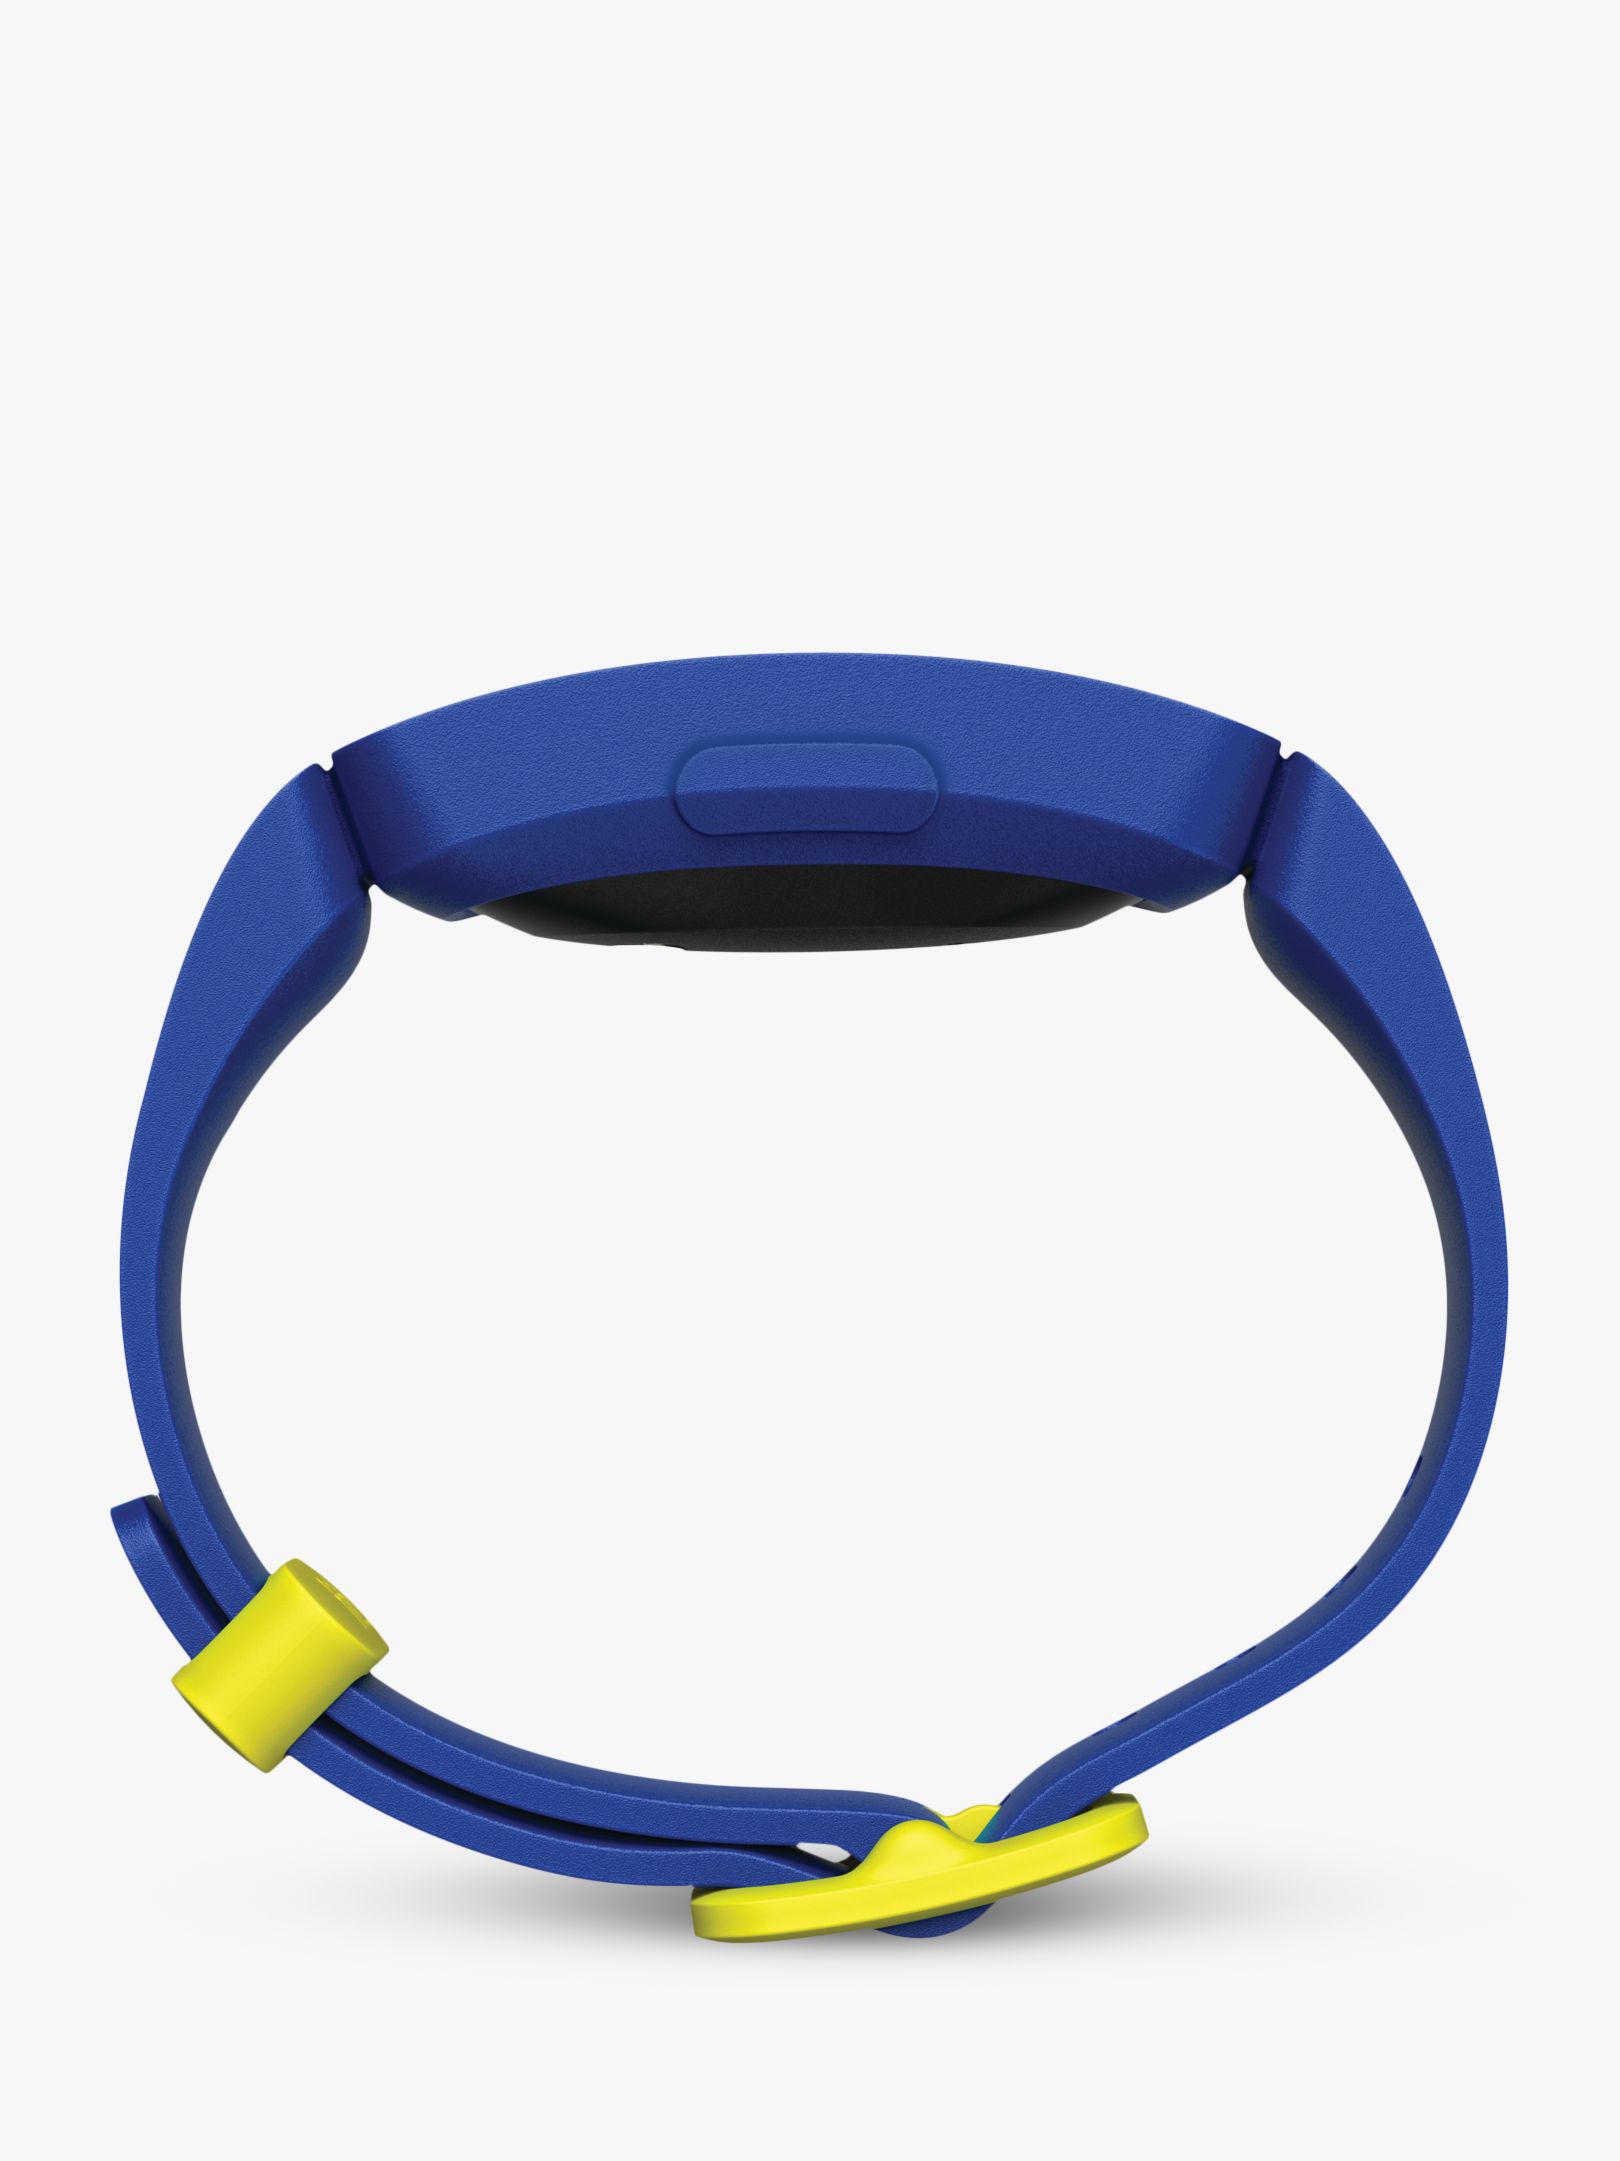 Fitbit Ace 2 Wristband, Children's 